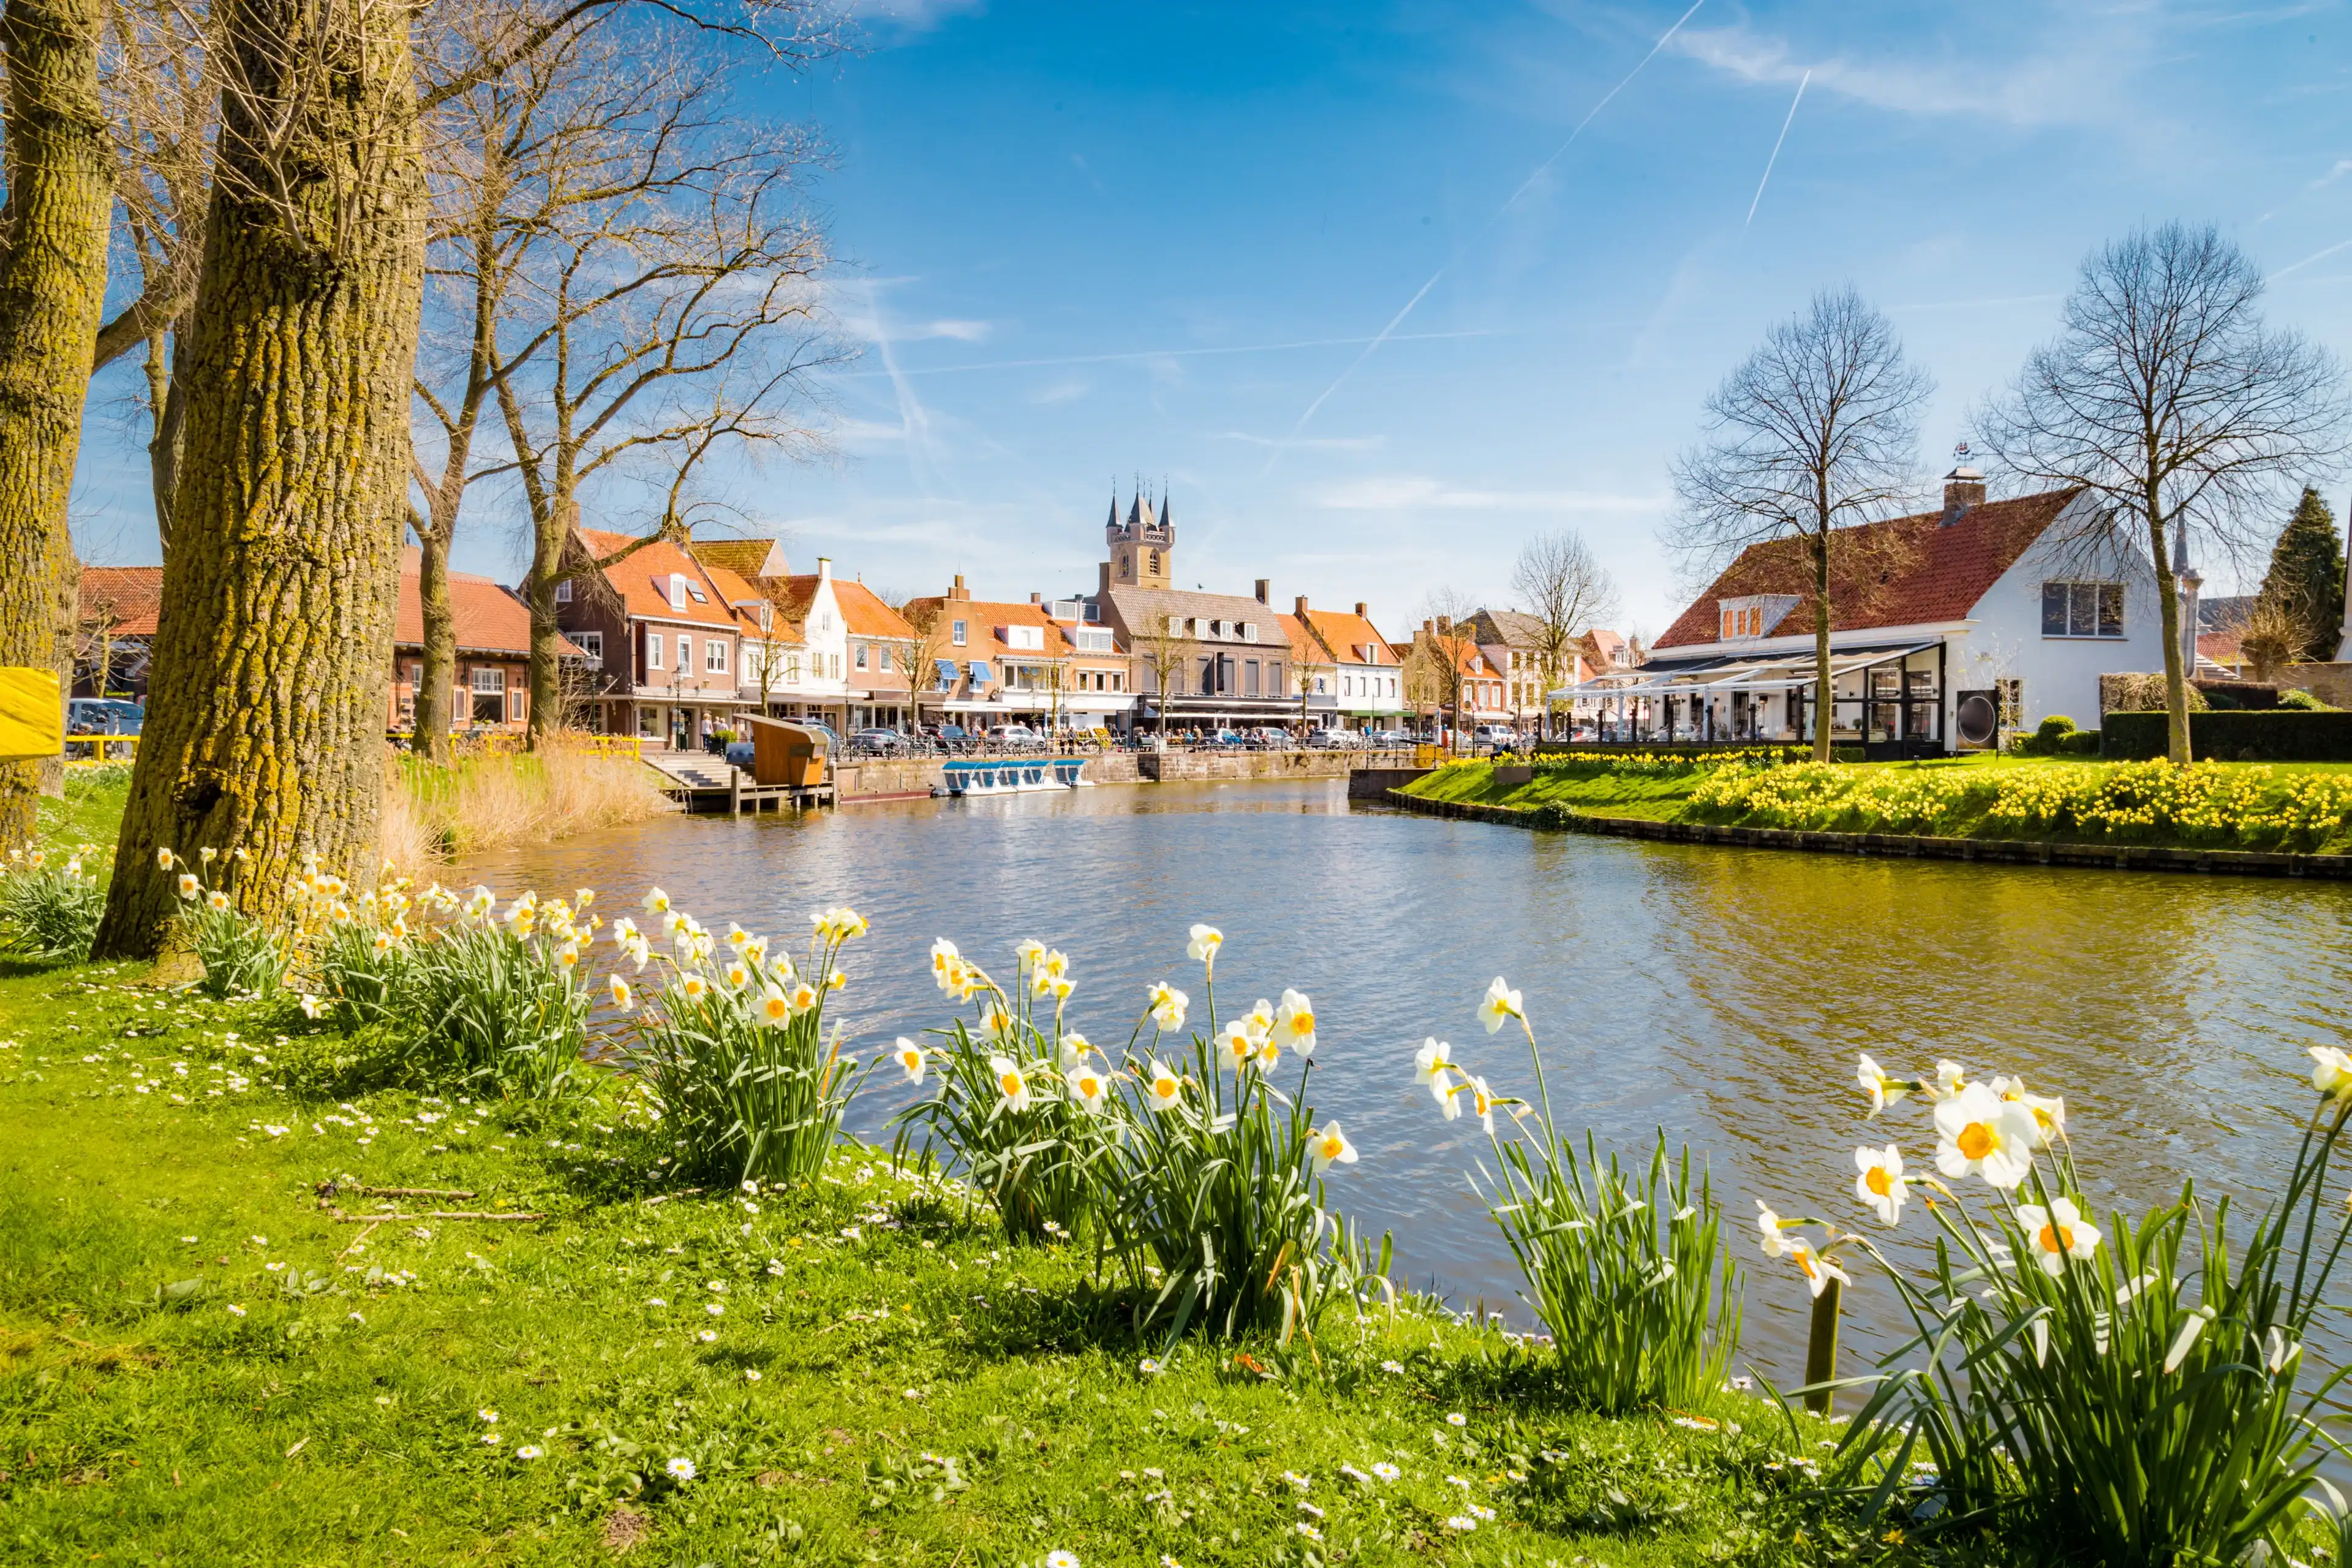 Beautiful view of the historic town of Sluis on a scenic sunny day with blue sky and clouds in spring, Zeelandic Flanders region, Netherlands